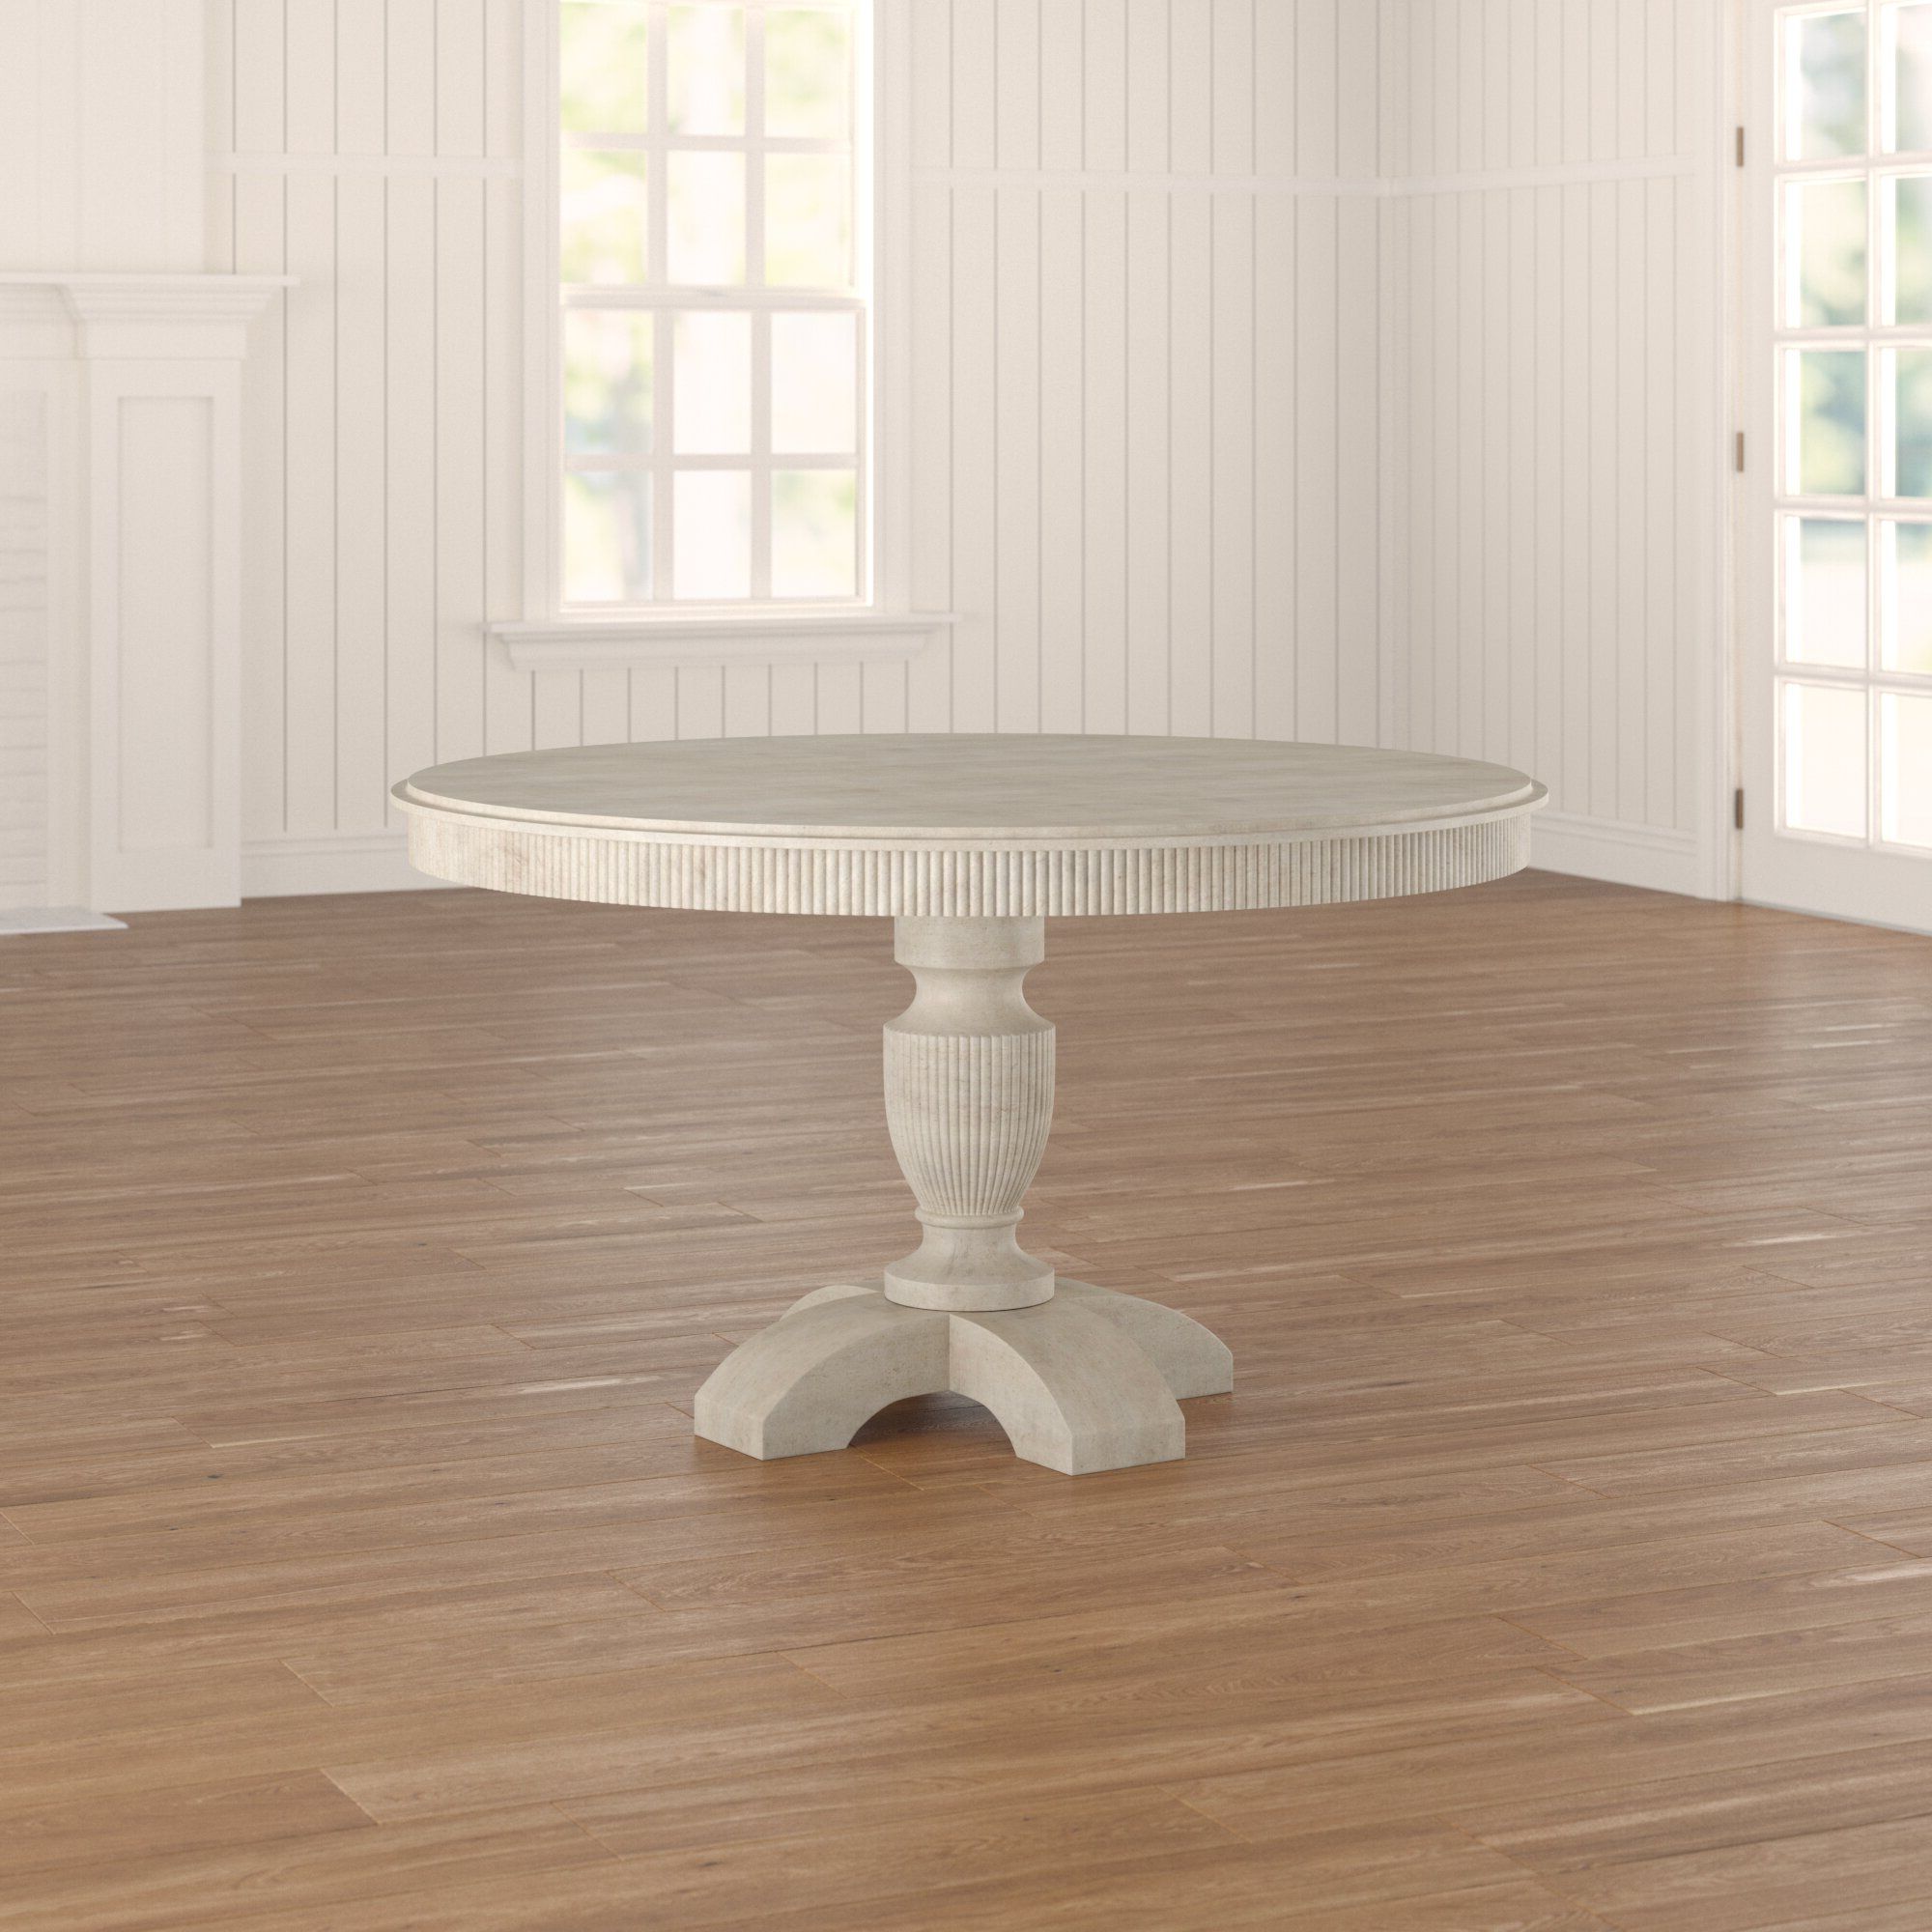 Coursey Round Dining Table Pertaining To Favorite Warner Round Pedestal Dining Tables (View 21 of 25)